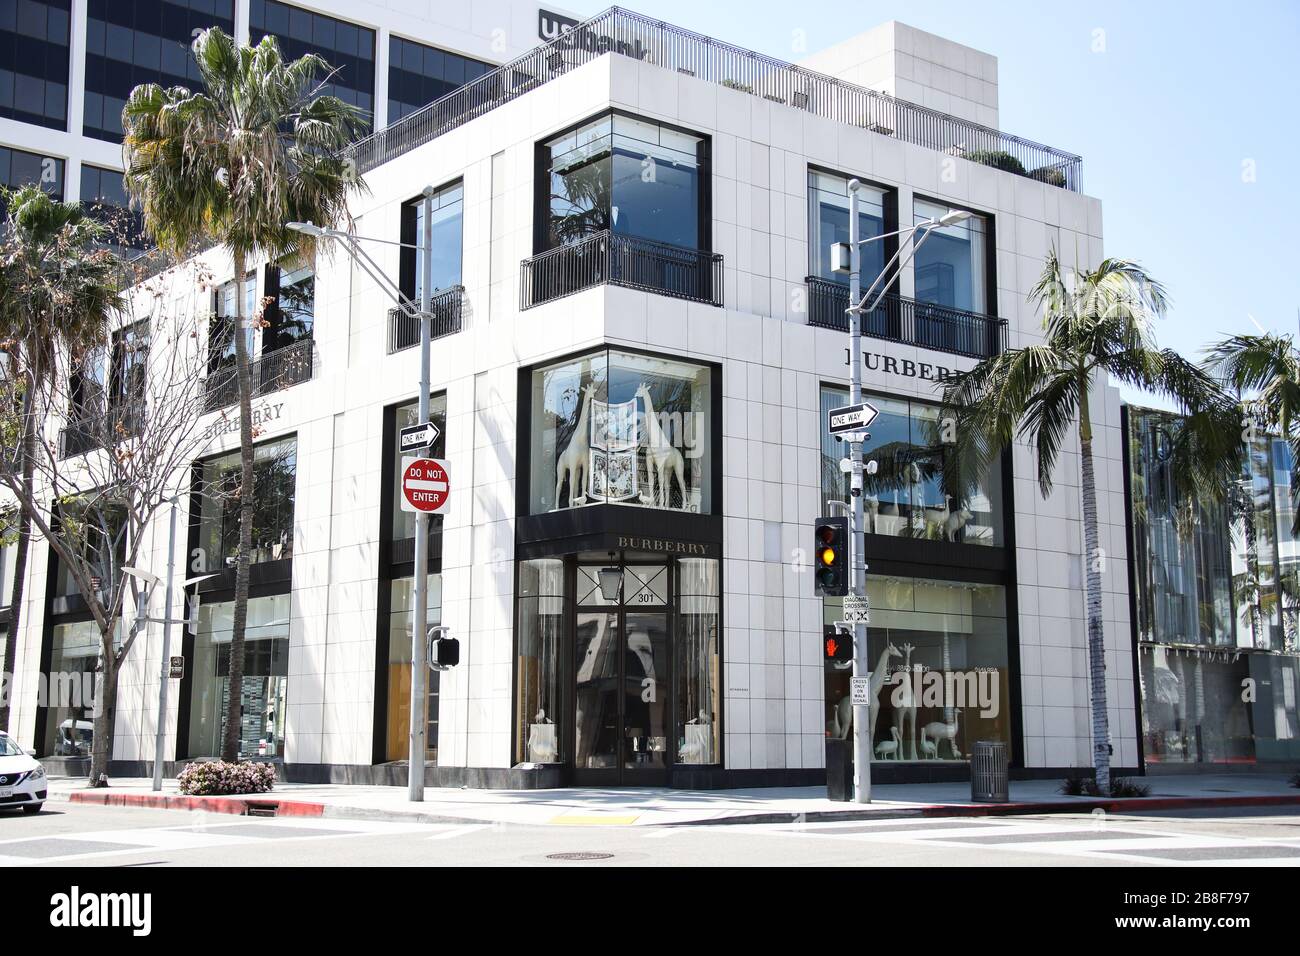 BEVERLY HILLS, LOS ANGELES, CALIFORNIA, USA - MARCH 21: Burberry Beverly  Hills Rodeo Drive store, temporarily closed due to the coronavirus, two  days after the 'Safer at Home' order issued by both